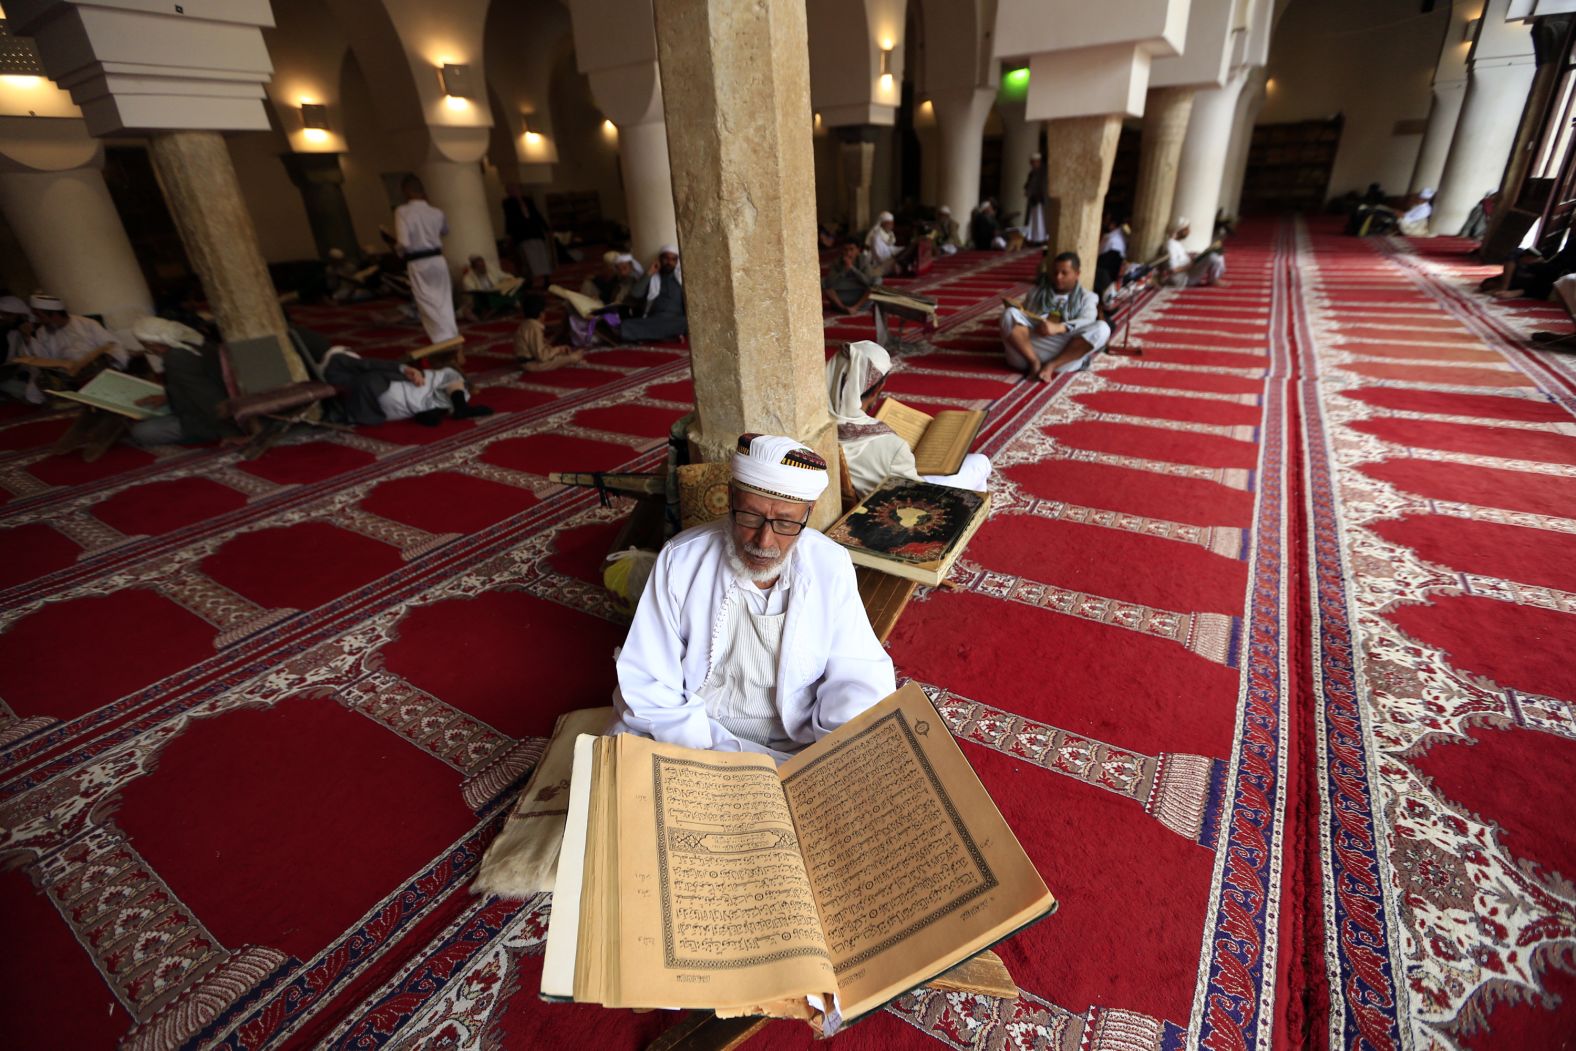 A Yemeni man reads the Quran at the Great Mosque in the old city of the capital Sanaa on May 9.